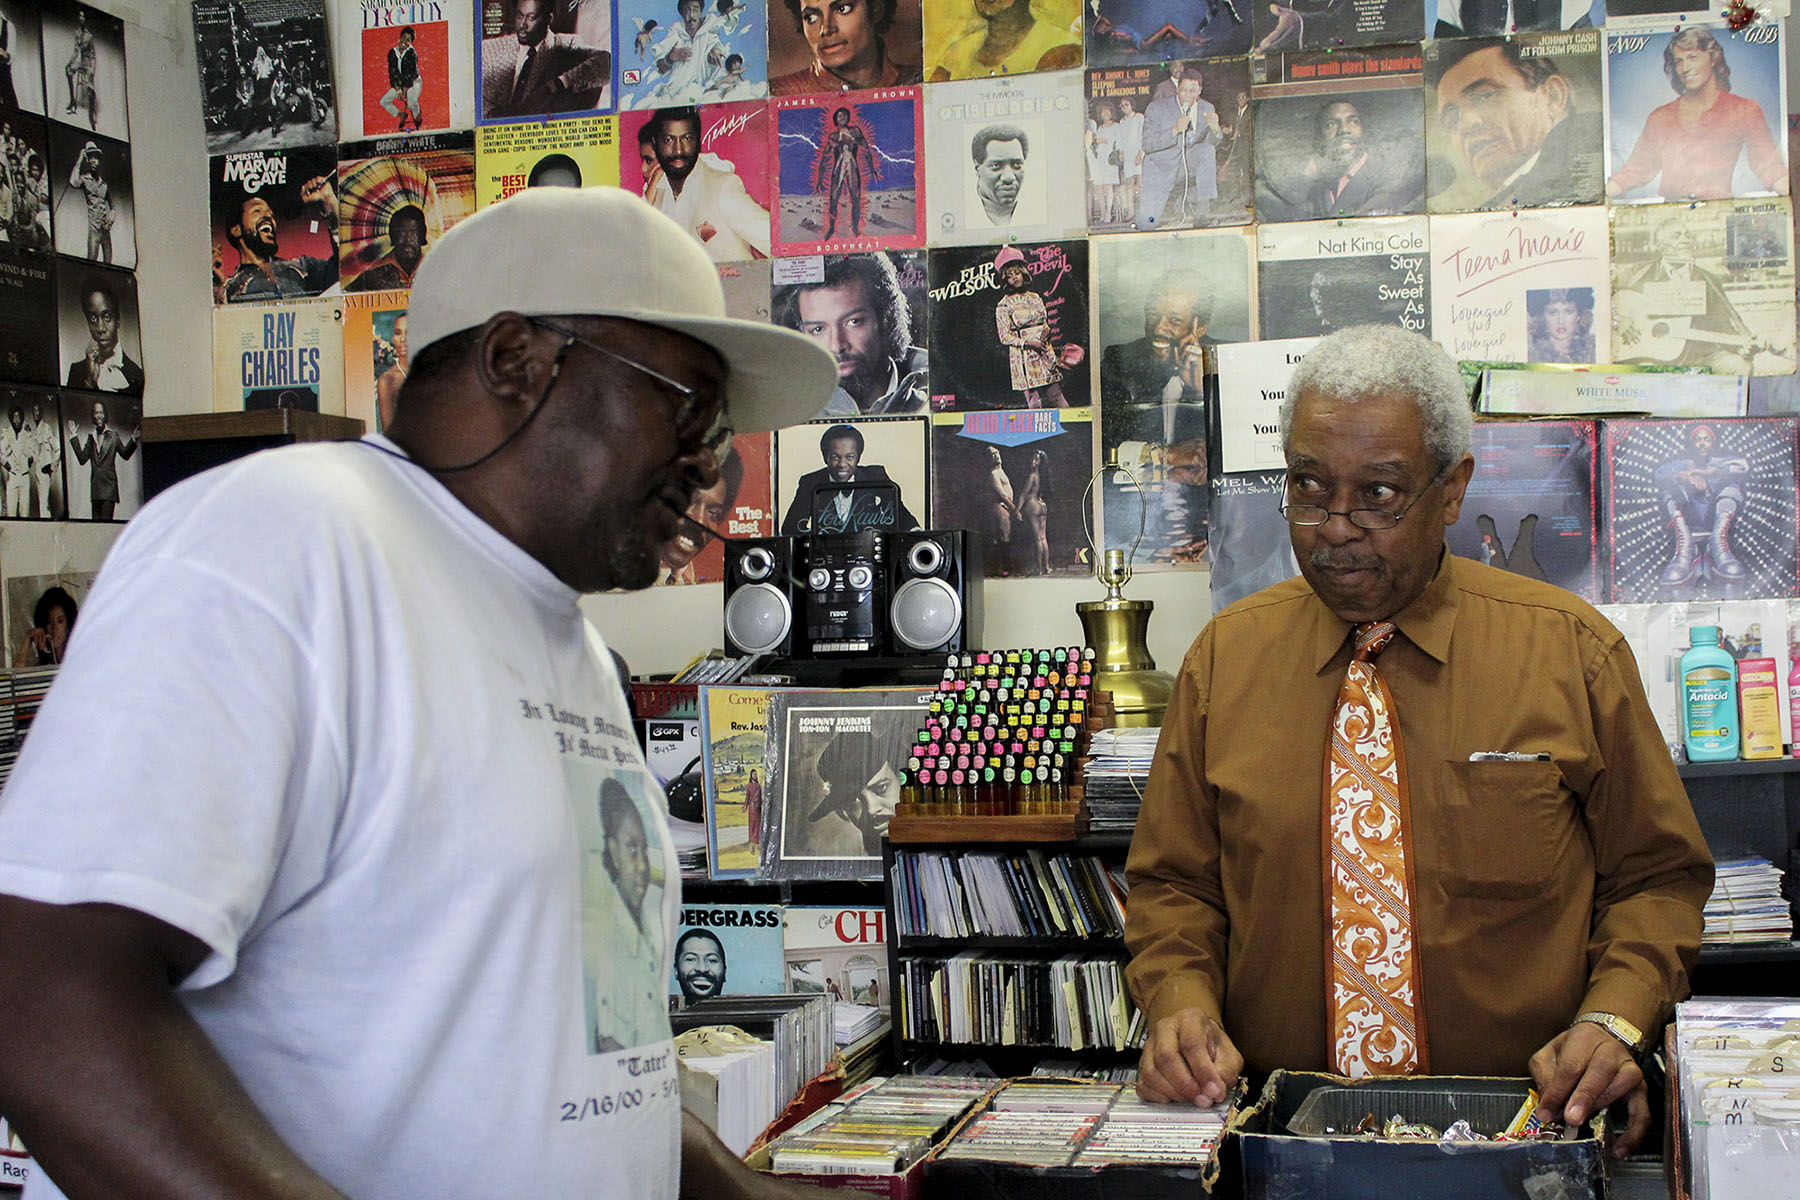 Lafayette Haynes helps a customer at Lafayette Old School Music Store, which he owns. During the civil rights era, Macon was a hub for both black businesses and entertainers, including Little Richard and Otis Redding. Consolidation reduced black influence in the area, Ficklin said. (Phillip Jackson/News21)